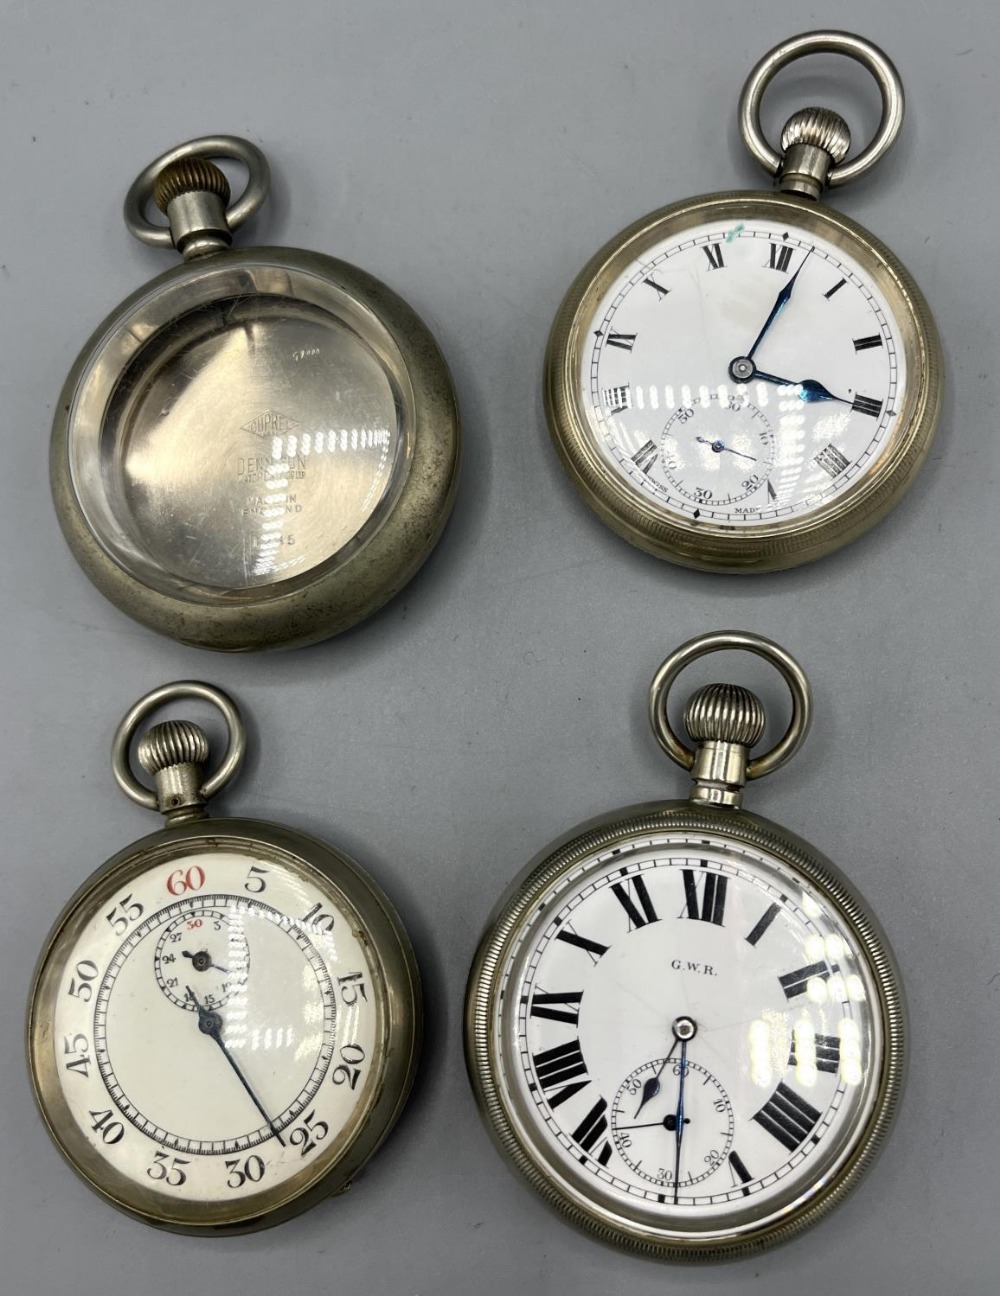 Cyma for G.W.R. nickel keyless pocket watch, signed white enamel Roman dial, signed movement, D54.